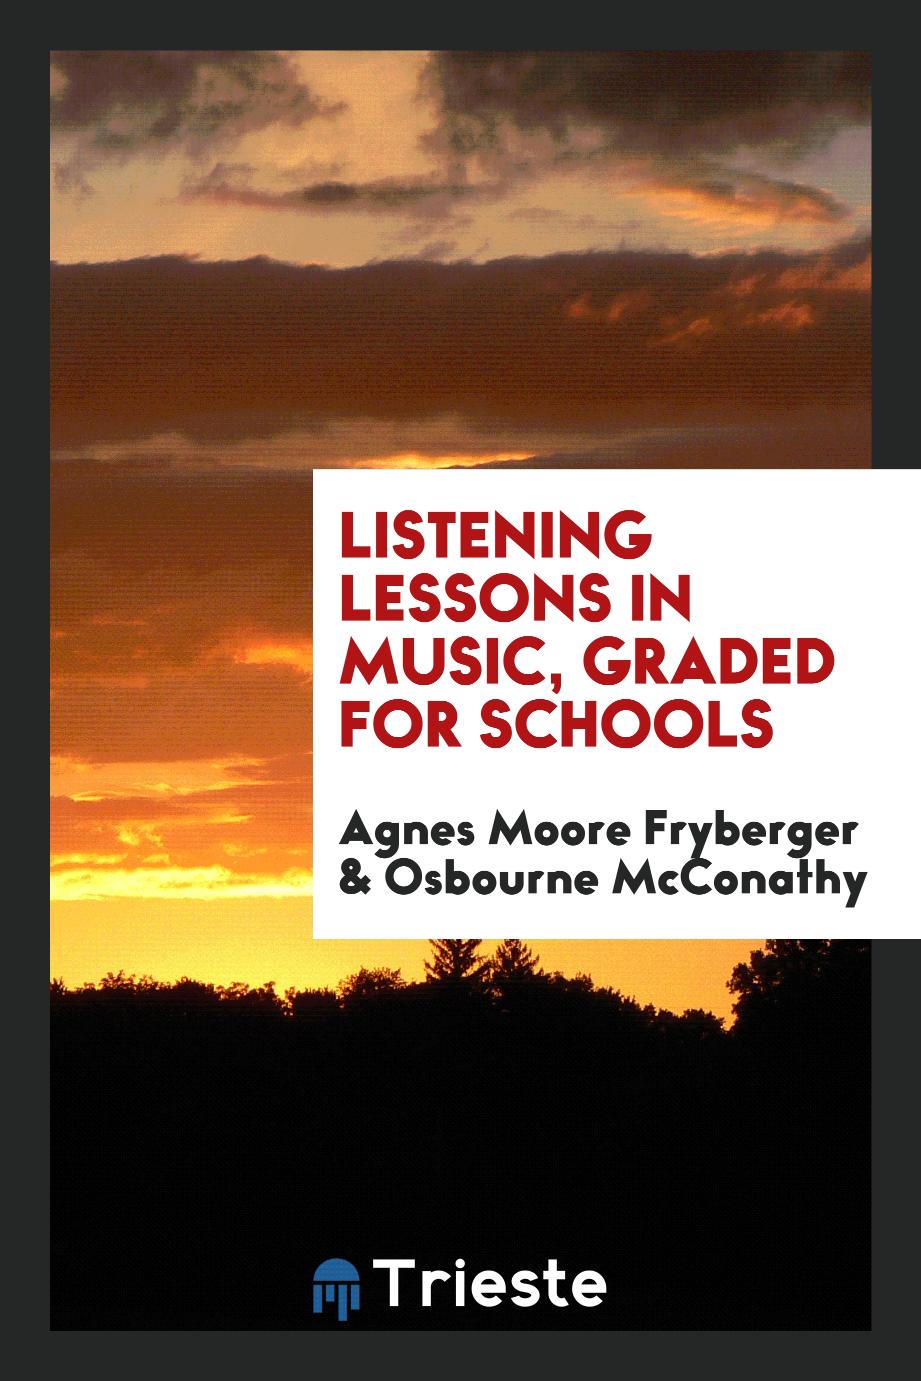 Listening Lessons in Music, Graded for Schools